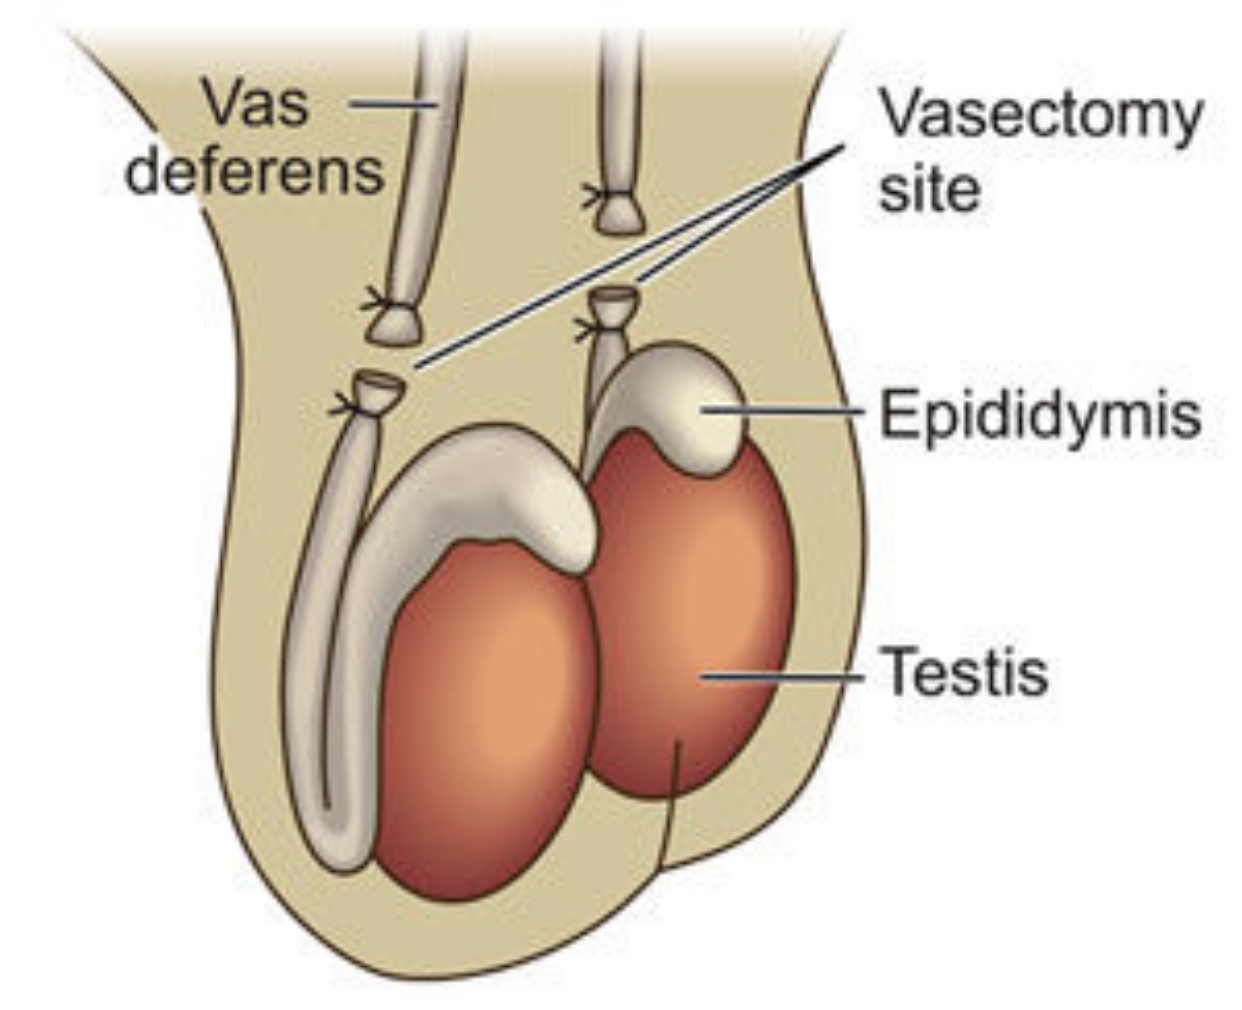 Vasectomy as a form of sterilization or permanent contraceptive method in men